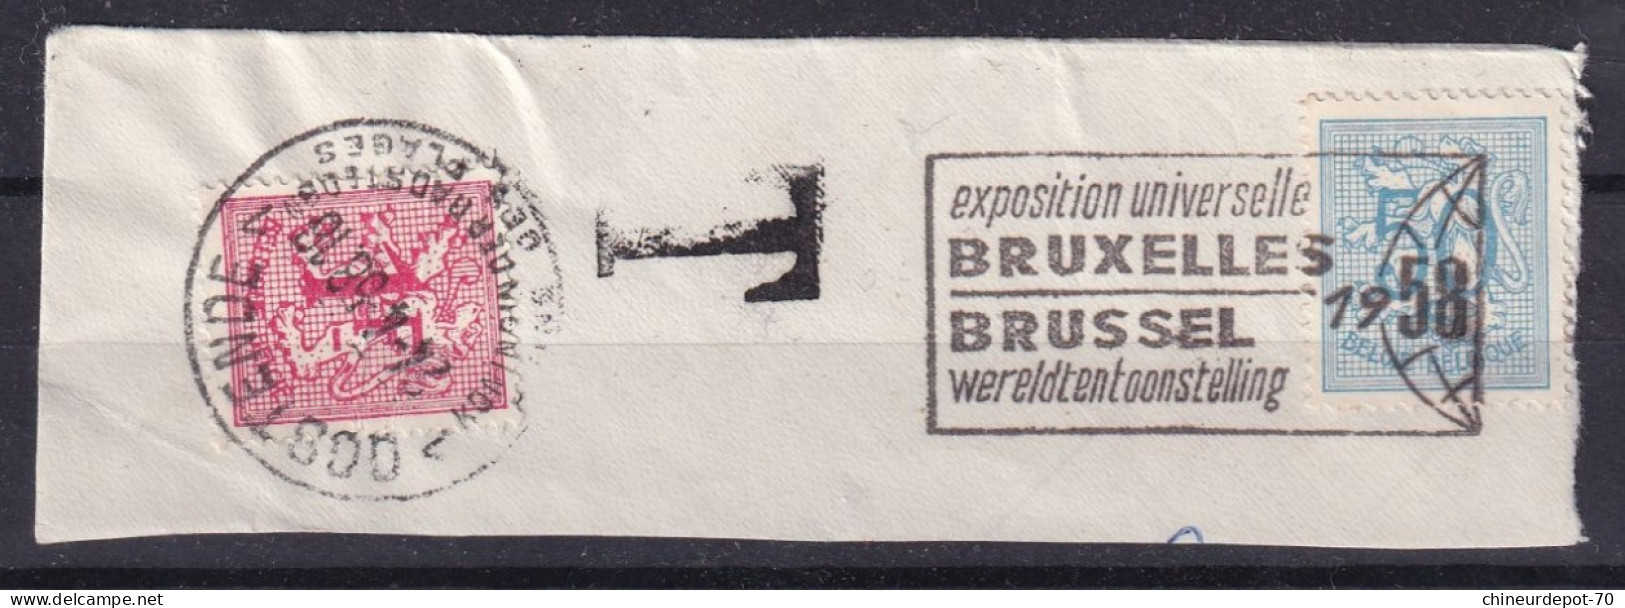 TIMBRES T Taxes CHIFFRES OOSTENDE BRUXELLES EXPOSITION 1958 - Postzegels